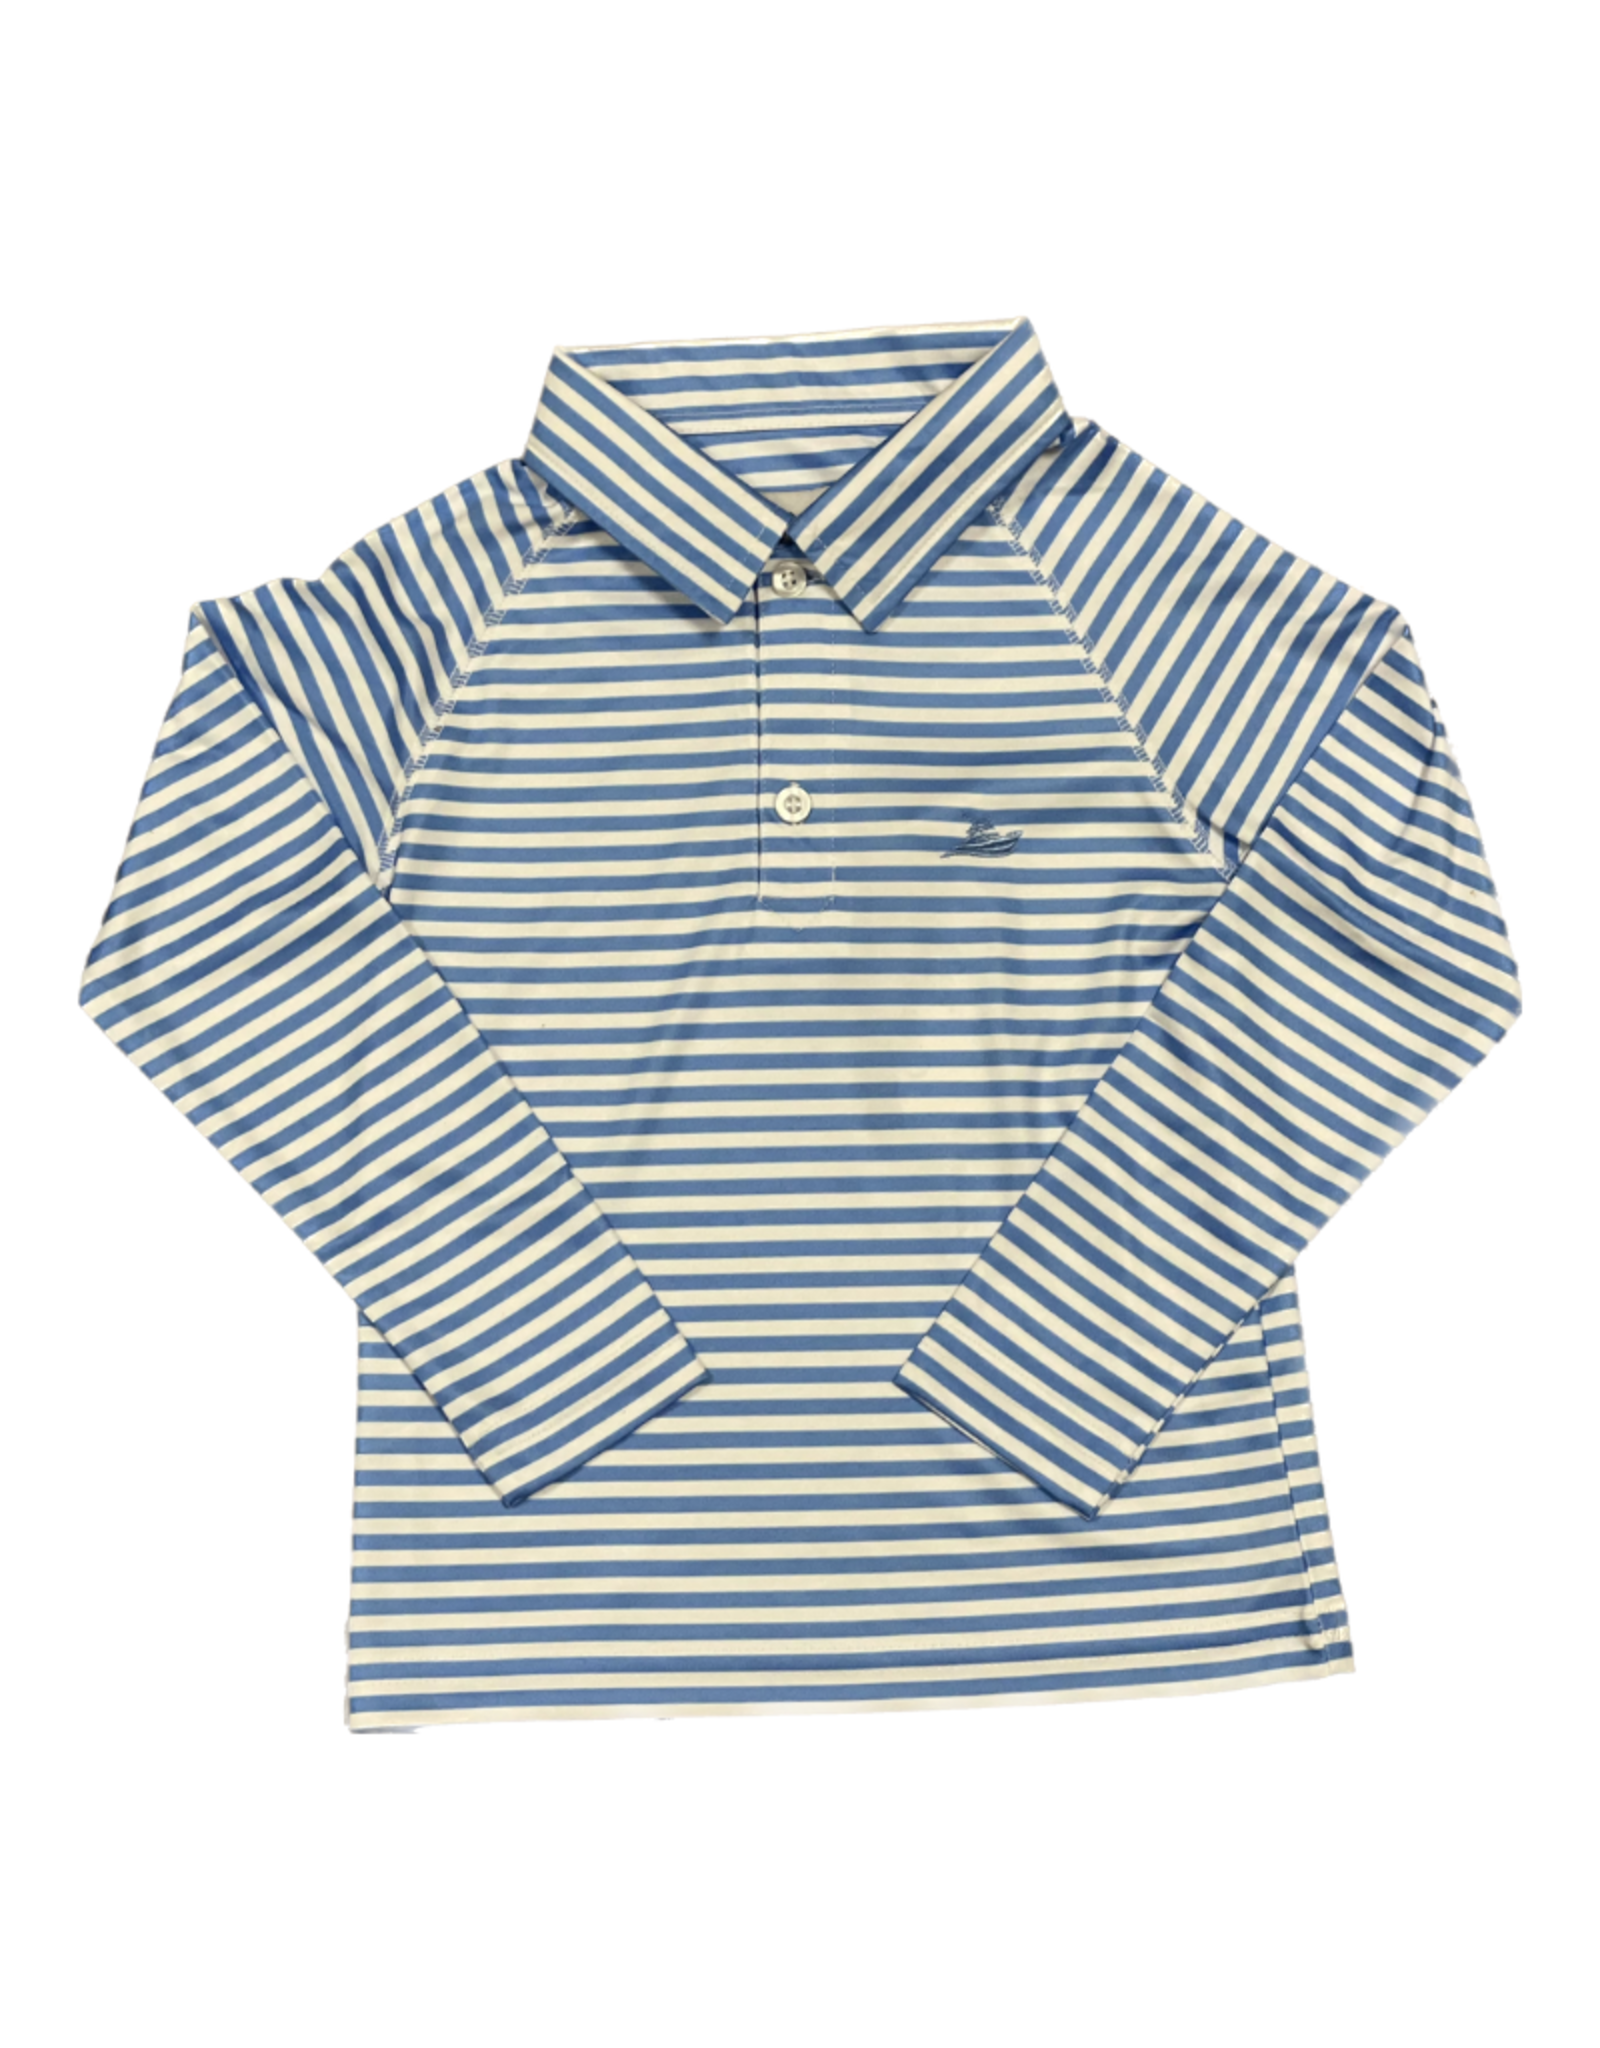 SouthBound LS Dryfit Classic Blue/White Stripe Polo